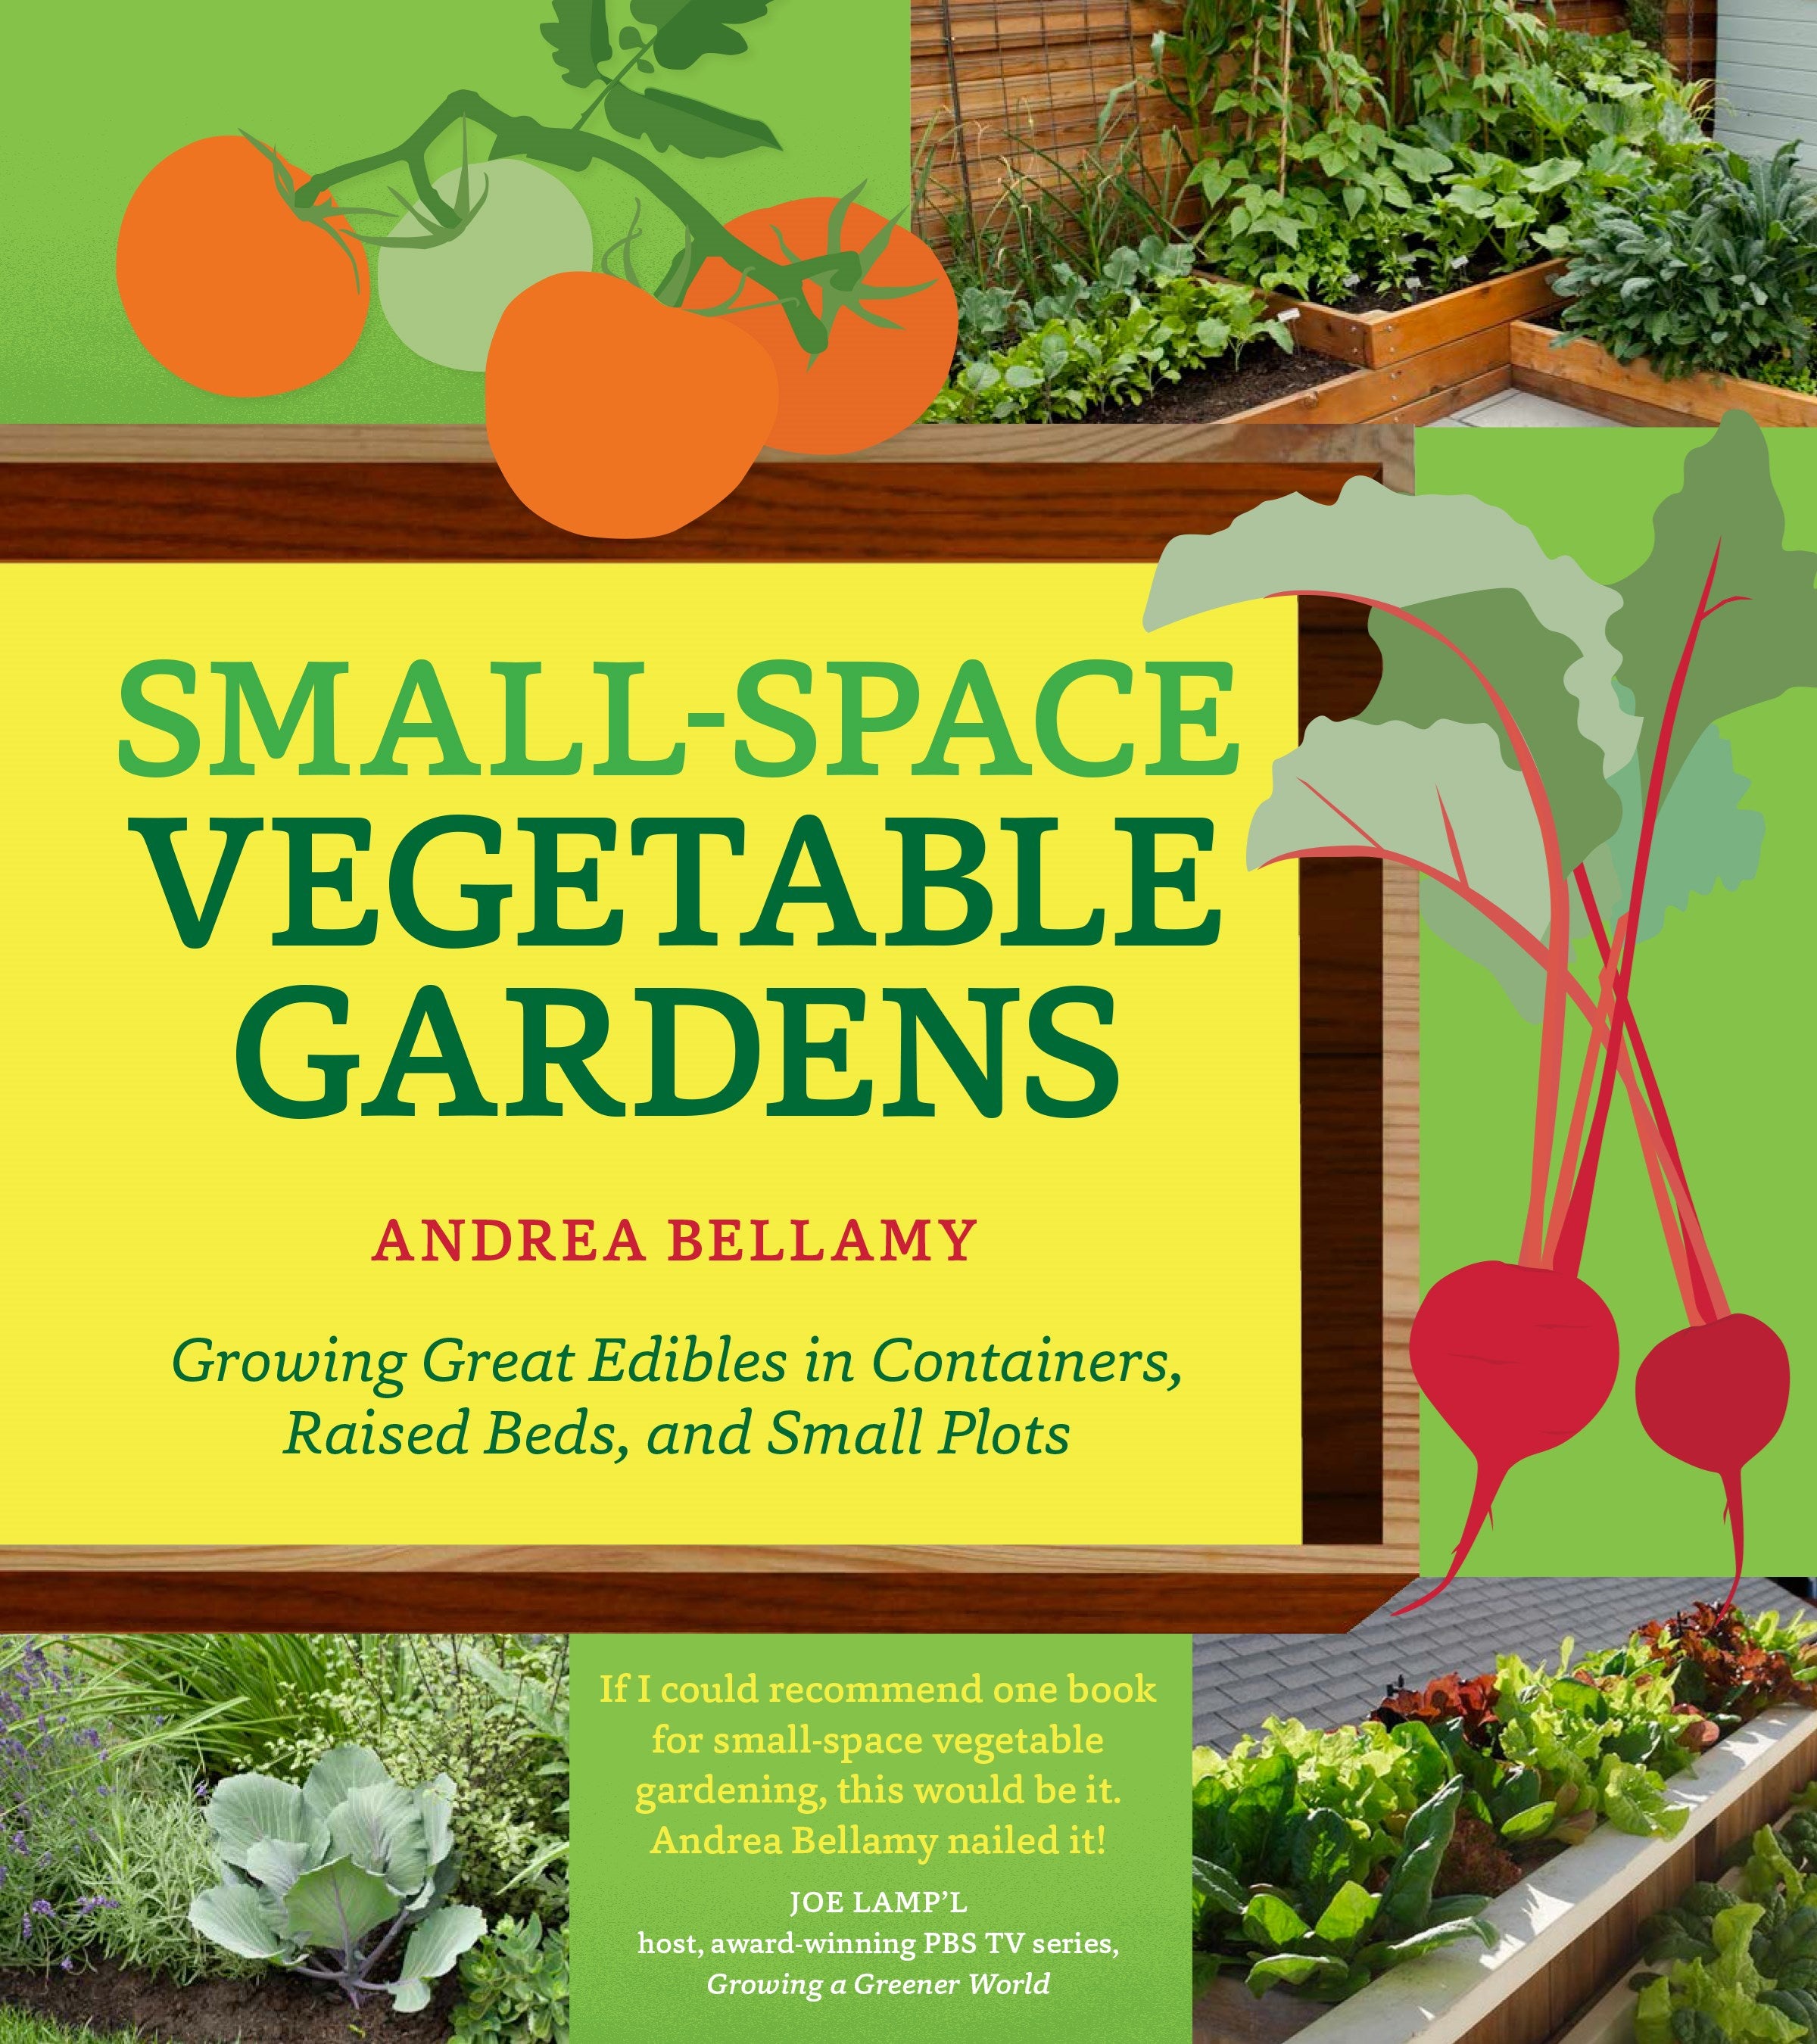 Small-Space Vegetable Gardens: Growing Great Edibles in Containers, Raised Beds, and Small Plots